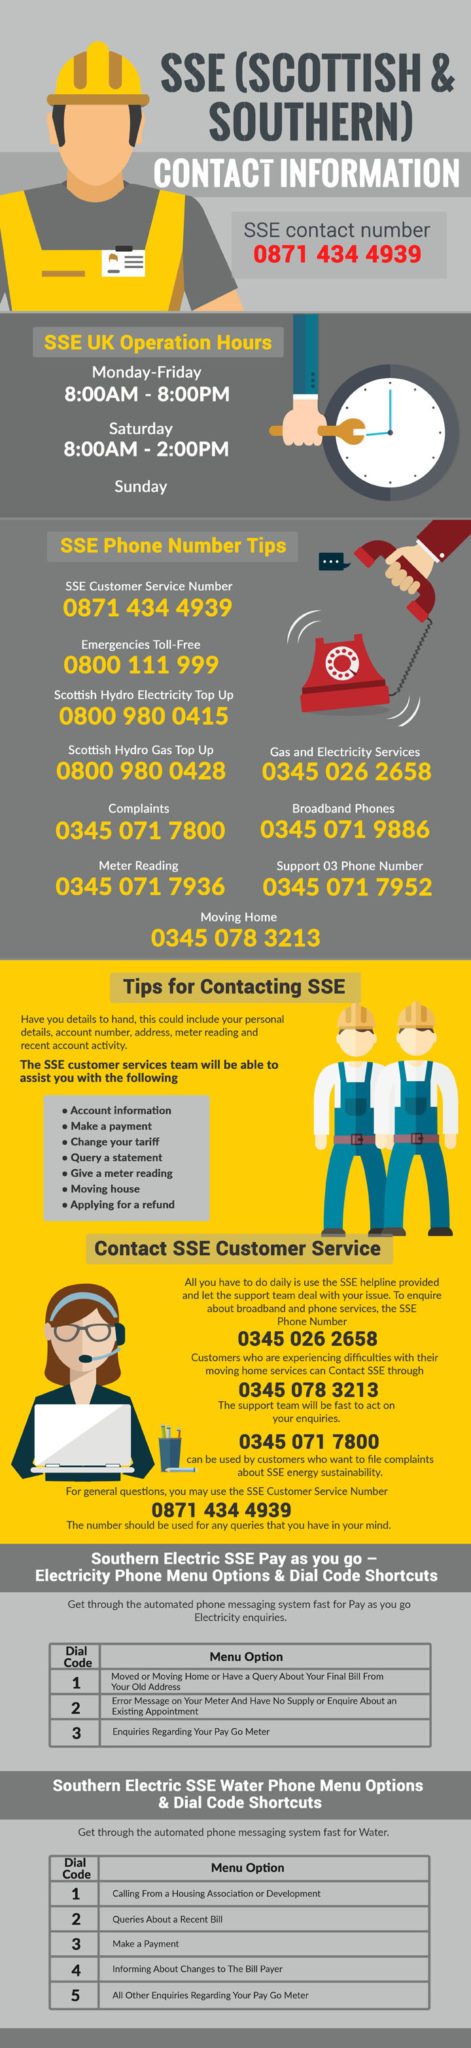 SSE (Scottish & Southern) Contact Number